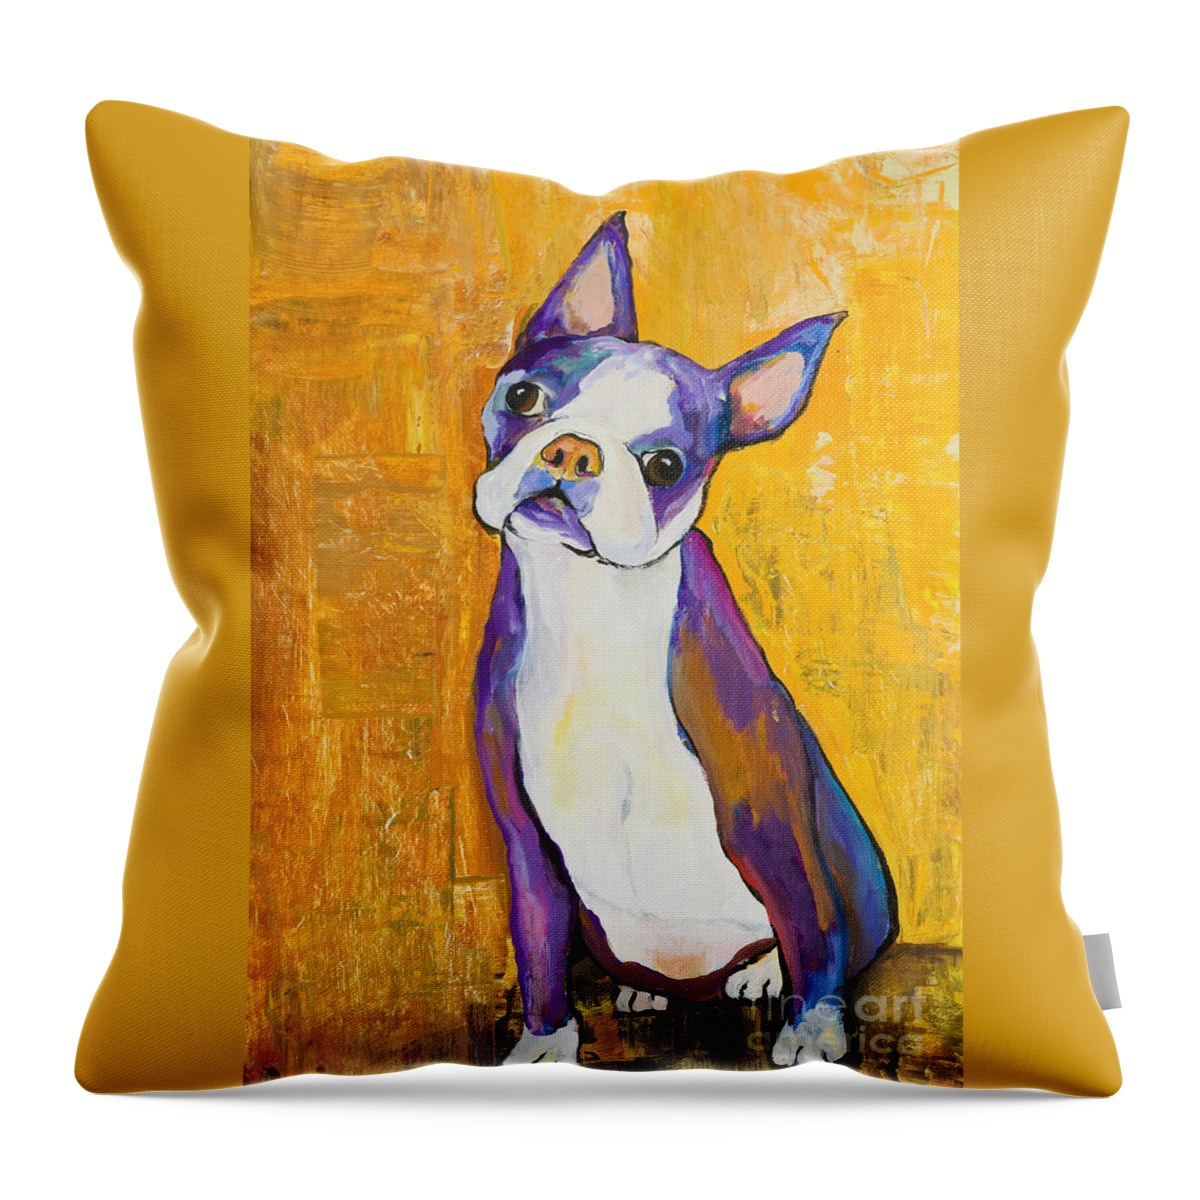 Boston Terrier Animals Acrylic Dog Portraits Pet Portraits Animal Portraits Pat Saunders-white Throw Pillow featuring the painting Cosmo by Pat Saunders-White